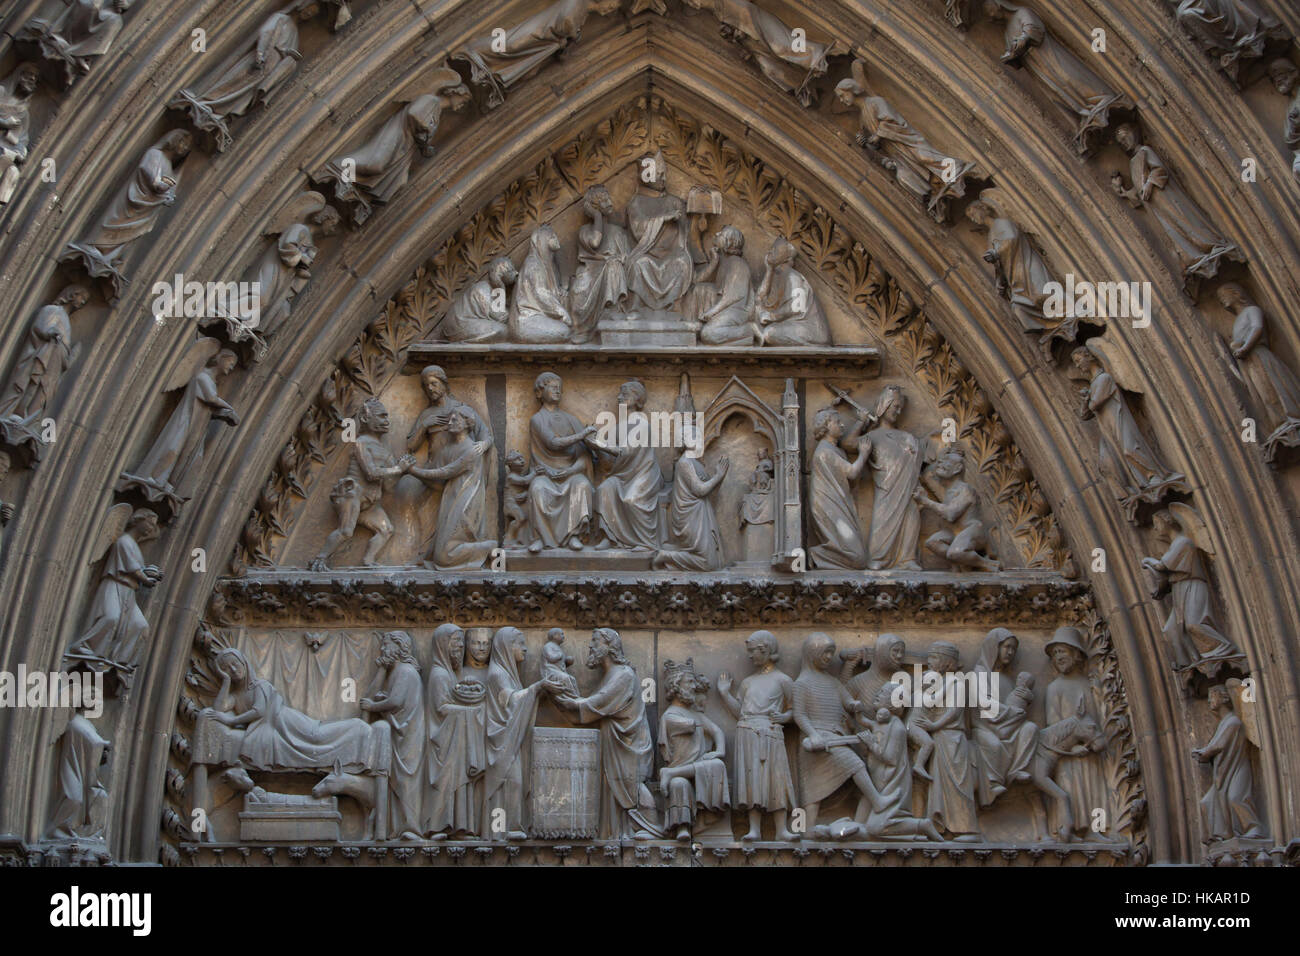 Gothic tympanum from circa 1250 on the northern facade of the Notre-Dame Cathedral (Notre-Dame de Paris) in Paris, France. Scenes from the early life of Jesus Christ (bottom row) and from the life of Saint Theophilus the Penitent who is said to have made a deal with the Devil (top row) are depicted in the relives. Stock Photo